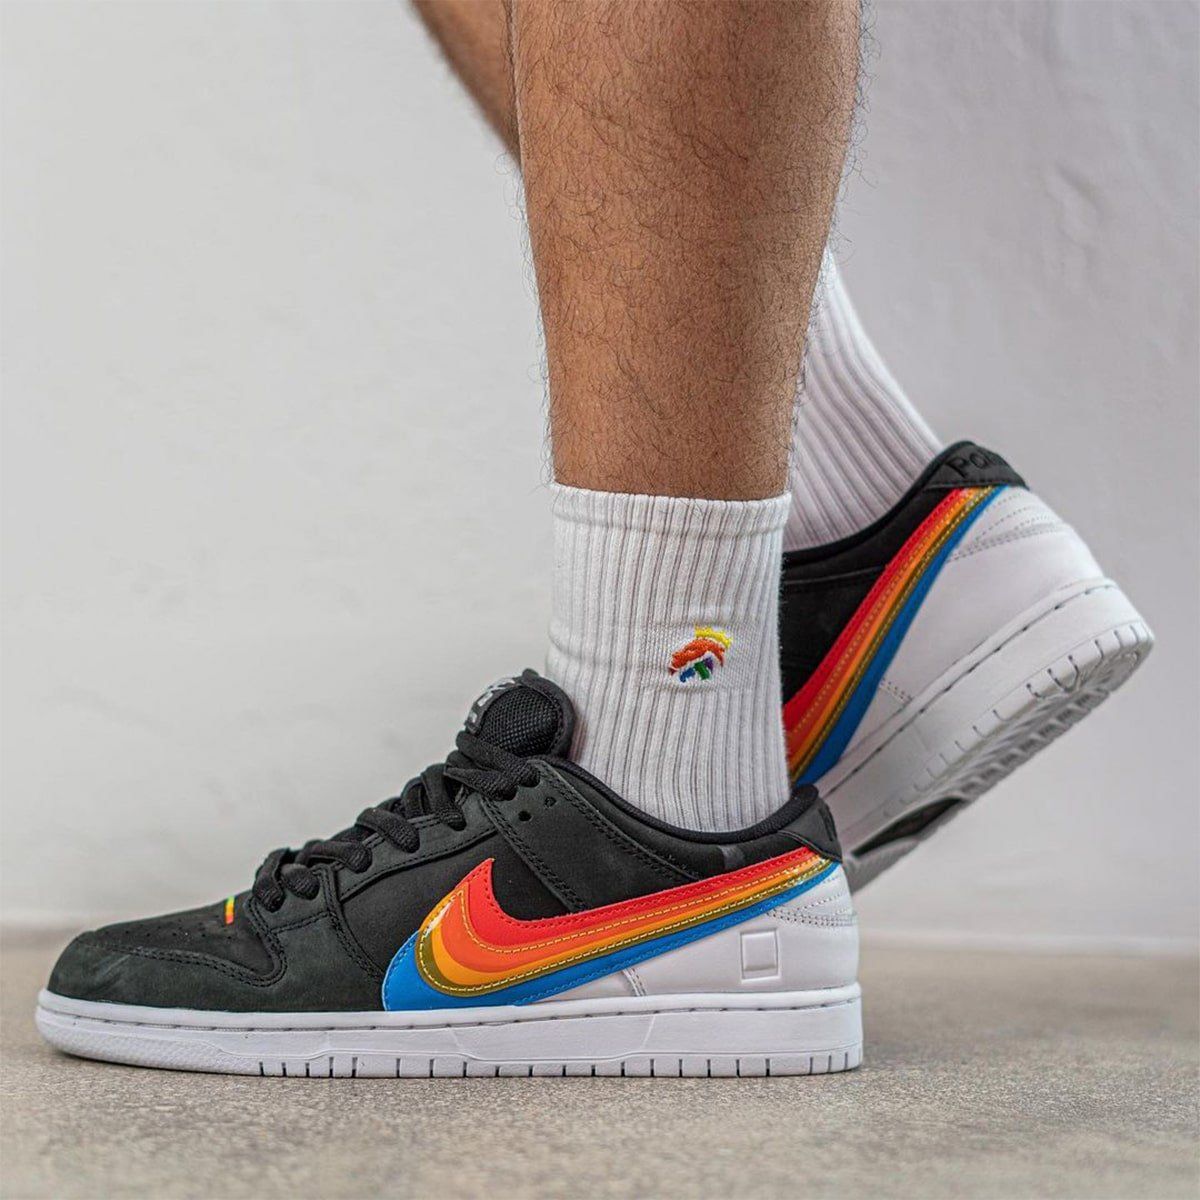 Where to Buy the Polaroid x Nike SB Dunk Low | HOUSE OF HEAT